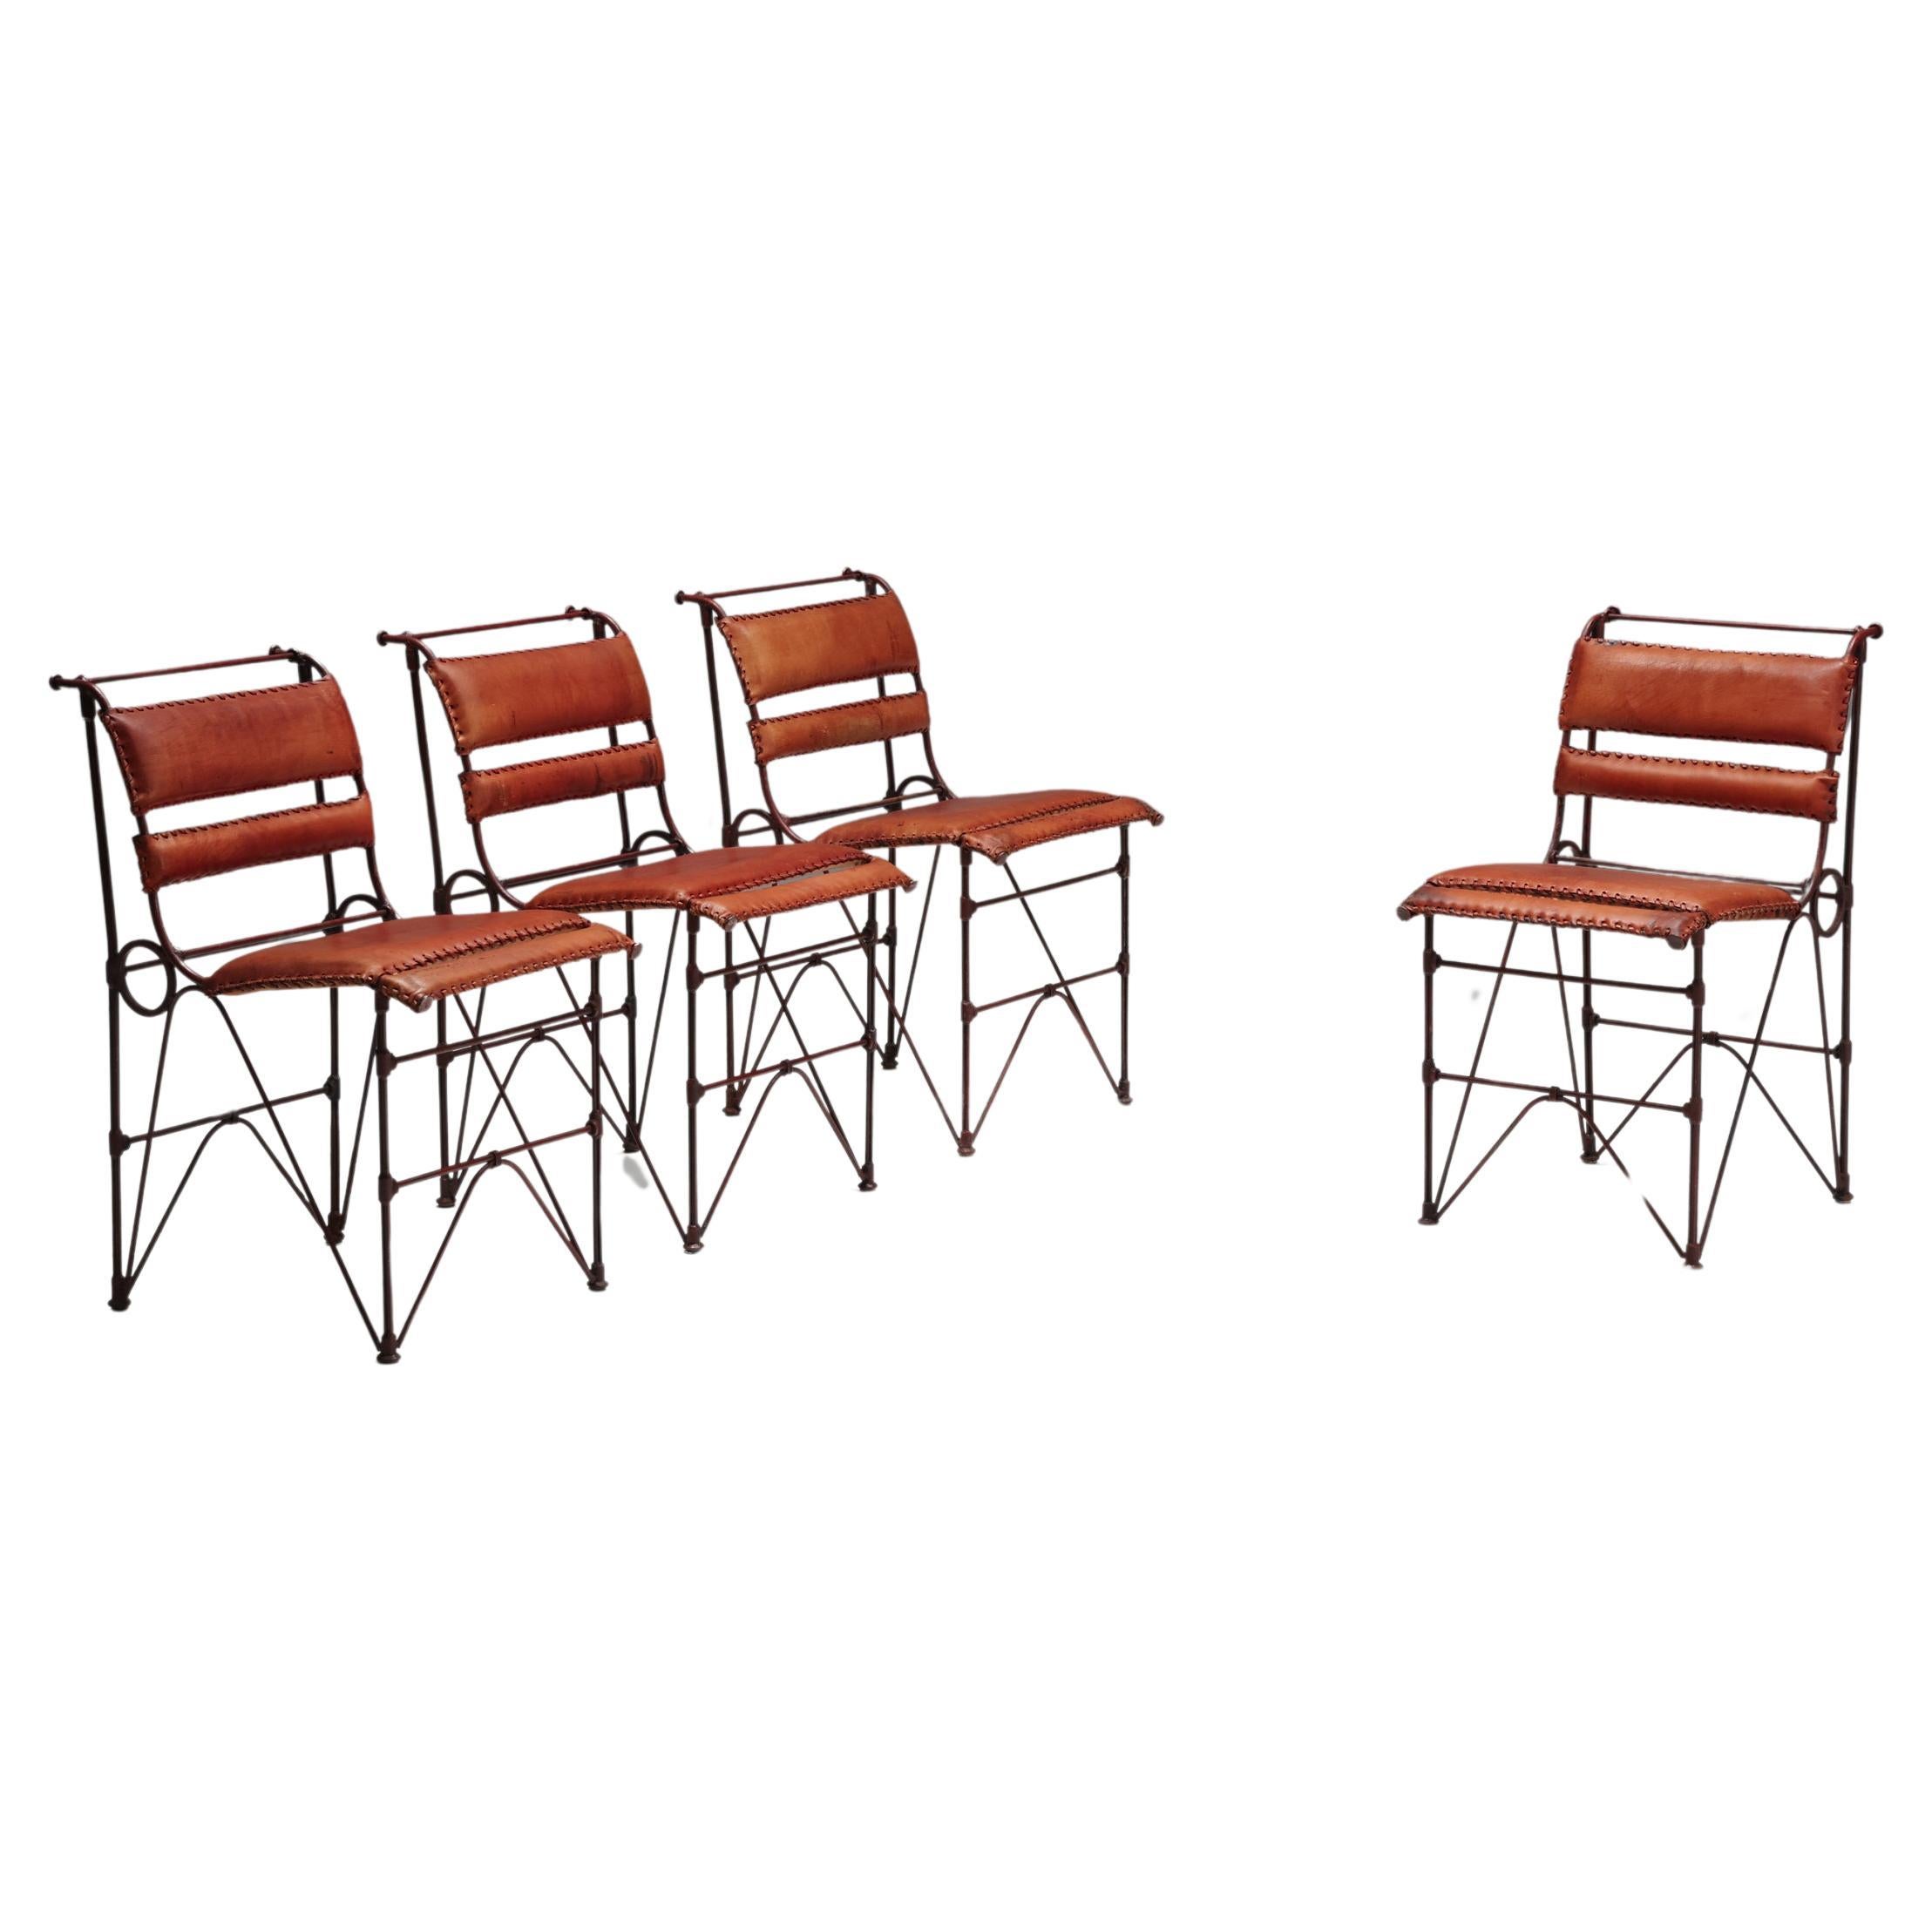 Dining Chairs in Cognac Leather and Steel, France, 1950s For Sale